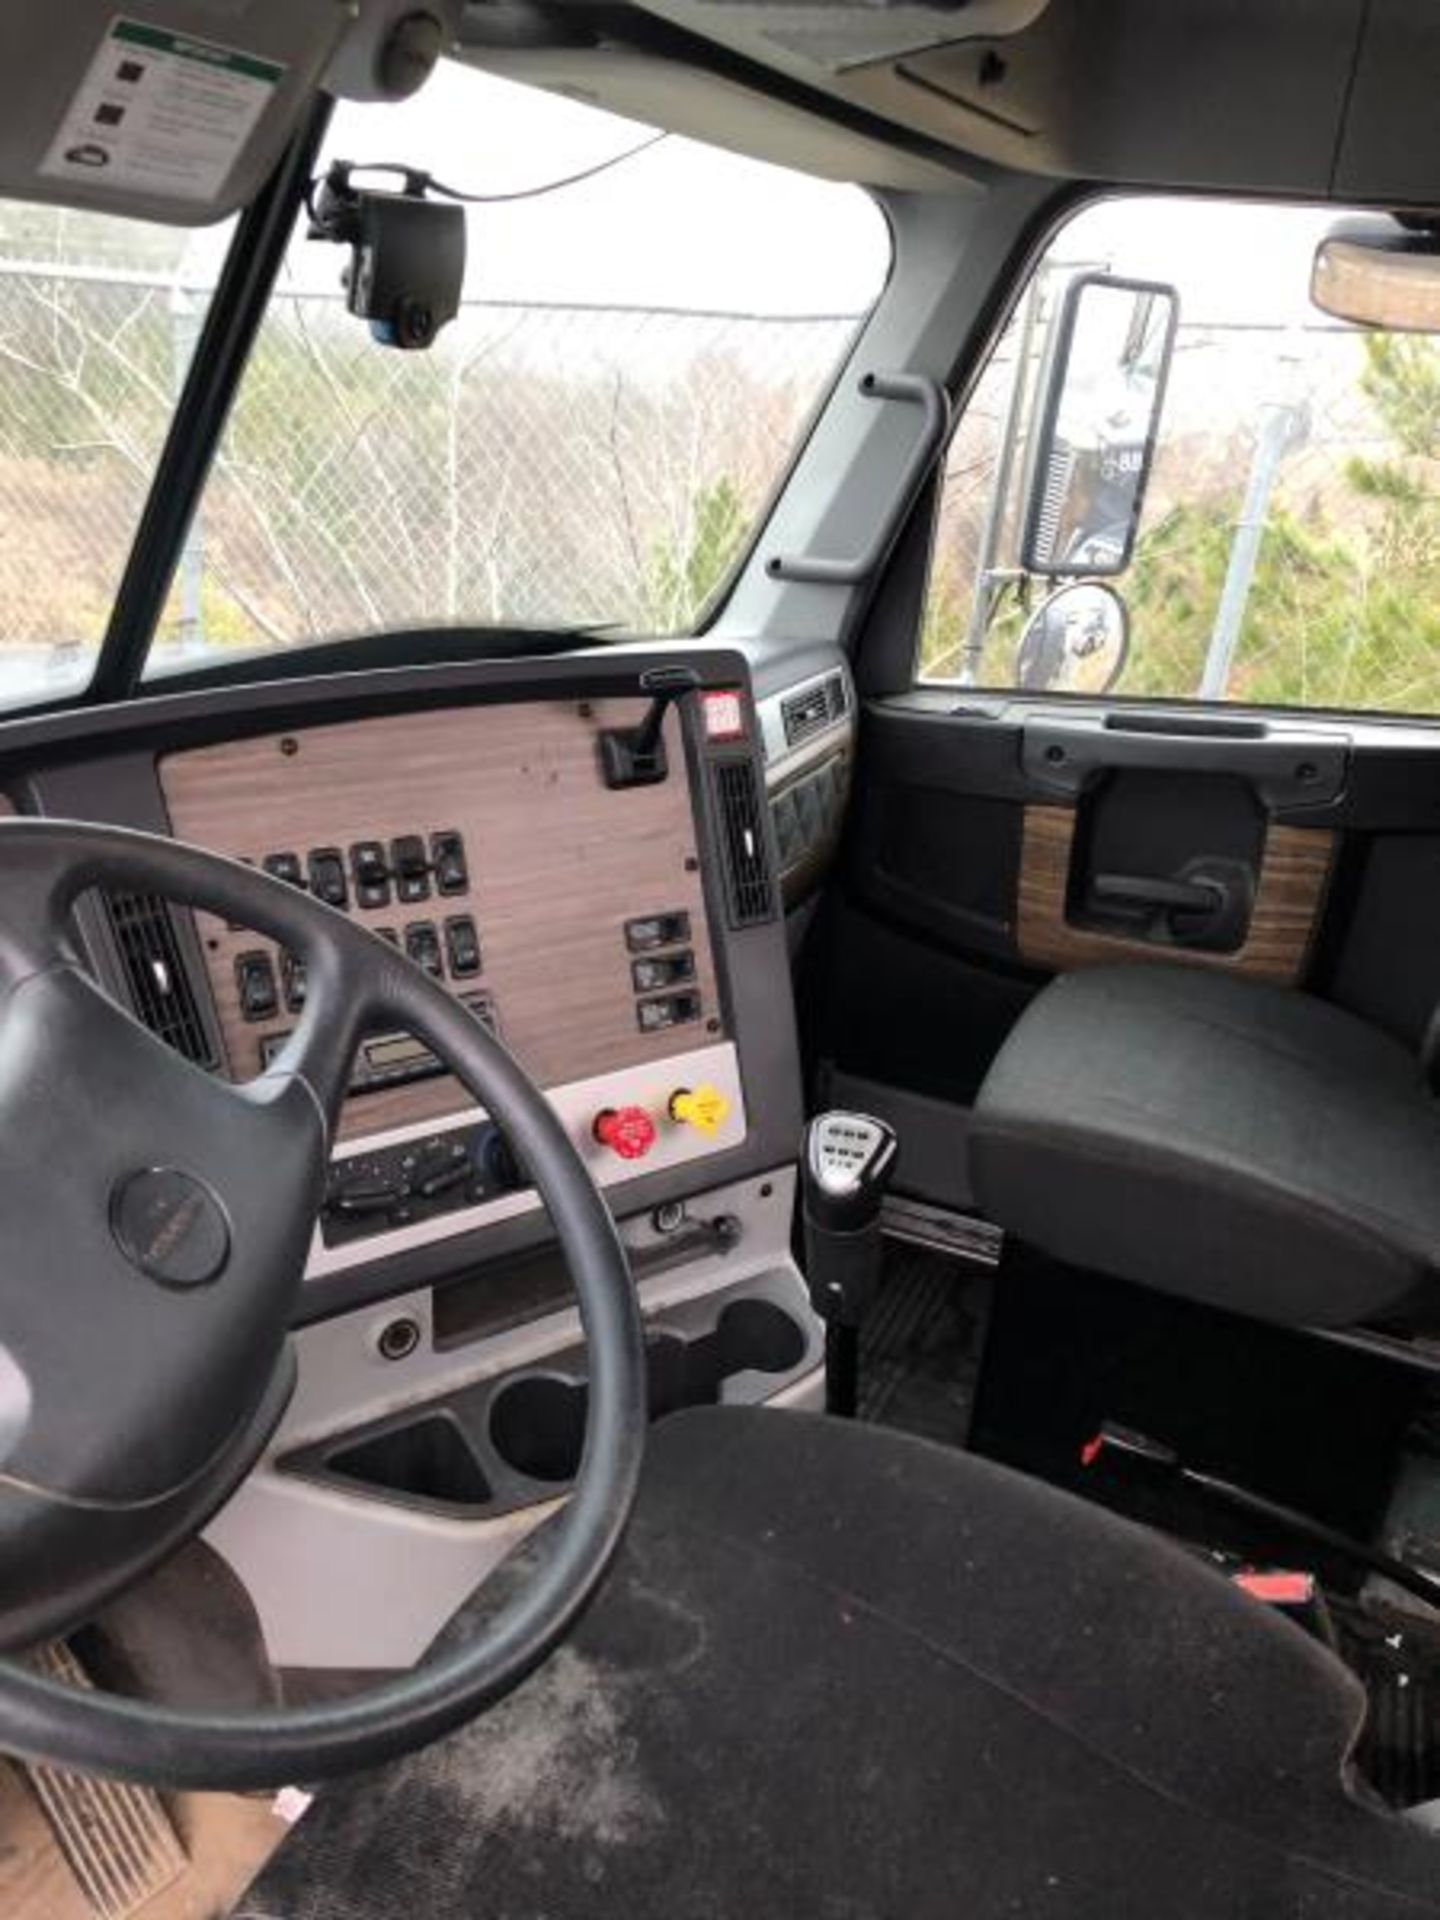 2017 Freightliner 122SD, 167,909 Miles - Image 28 of 28